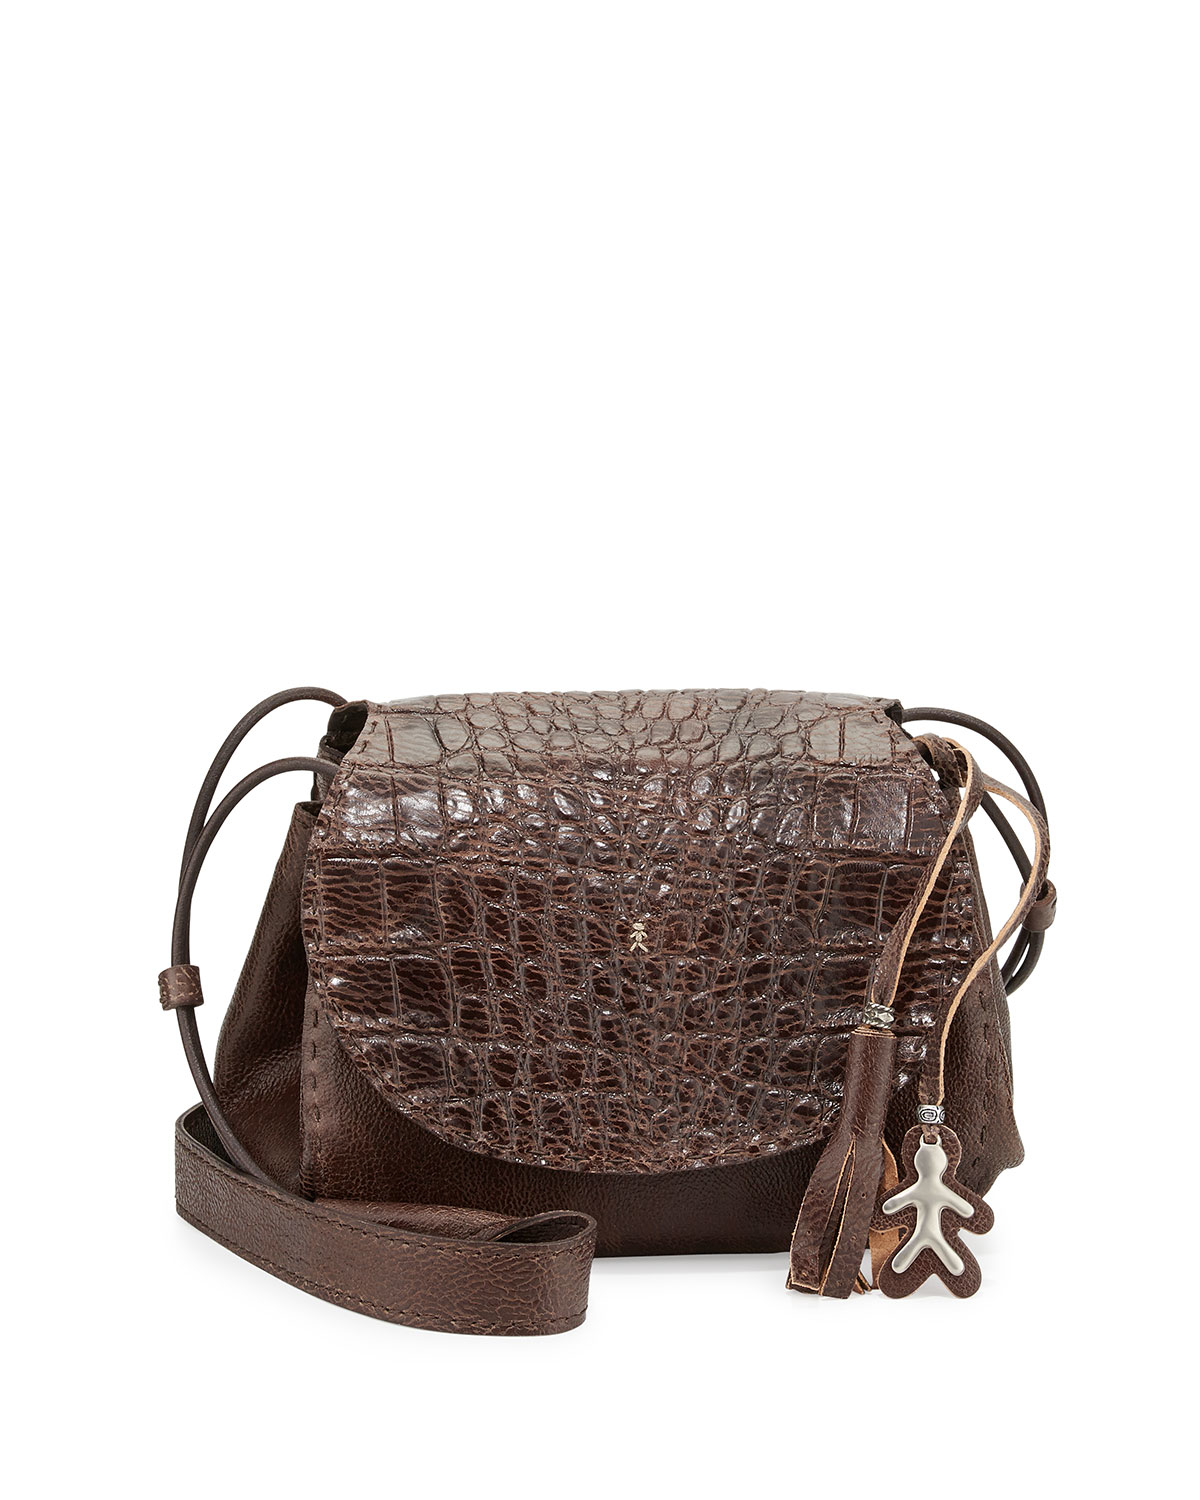 Lyst - Henry Beguelin Molly Small Croc-Stamped Messenger Bag in Brown